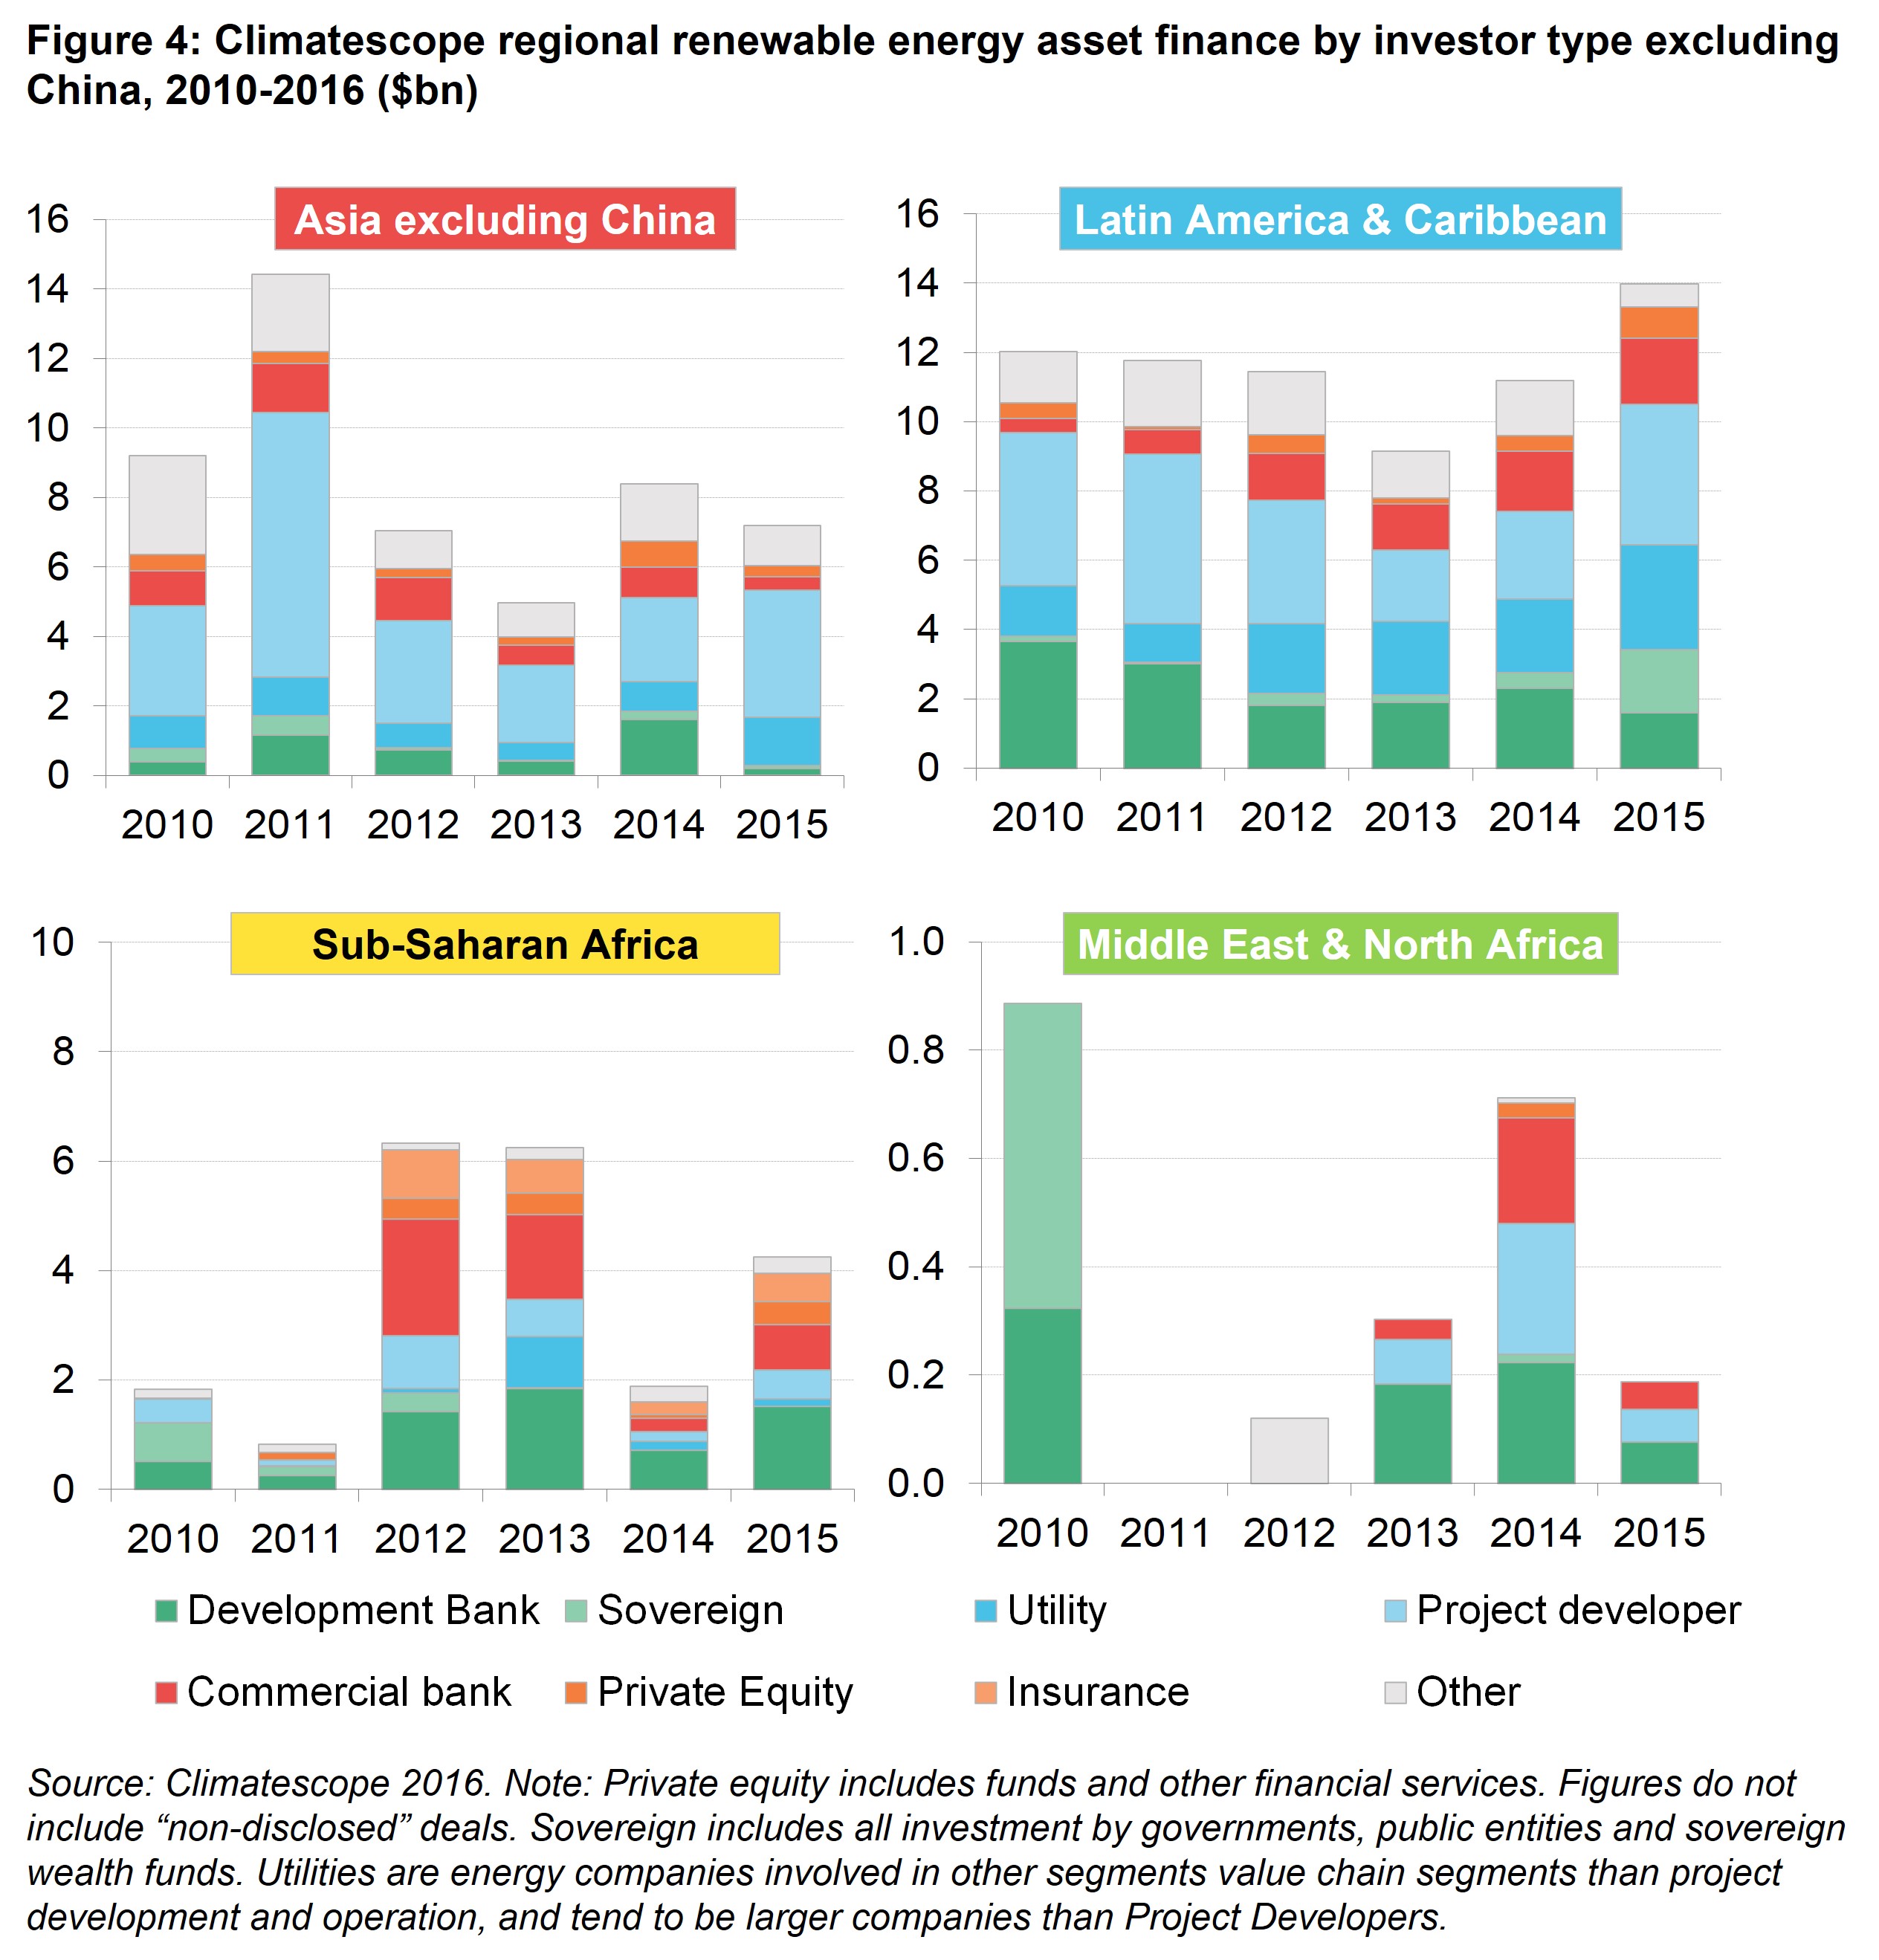 PII Fig 4 - Climatescope regional renewable energy asset finance by investor type excluding China, 2010-2016 ($bn)